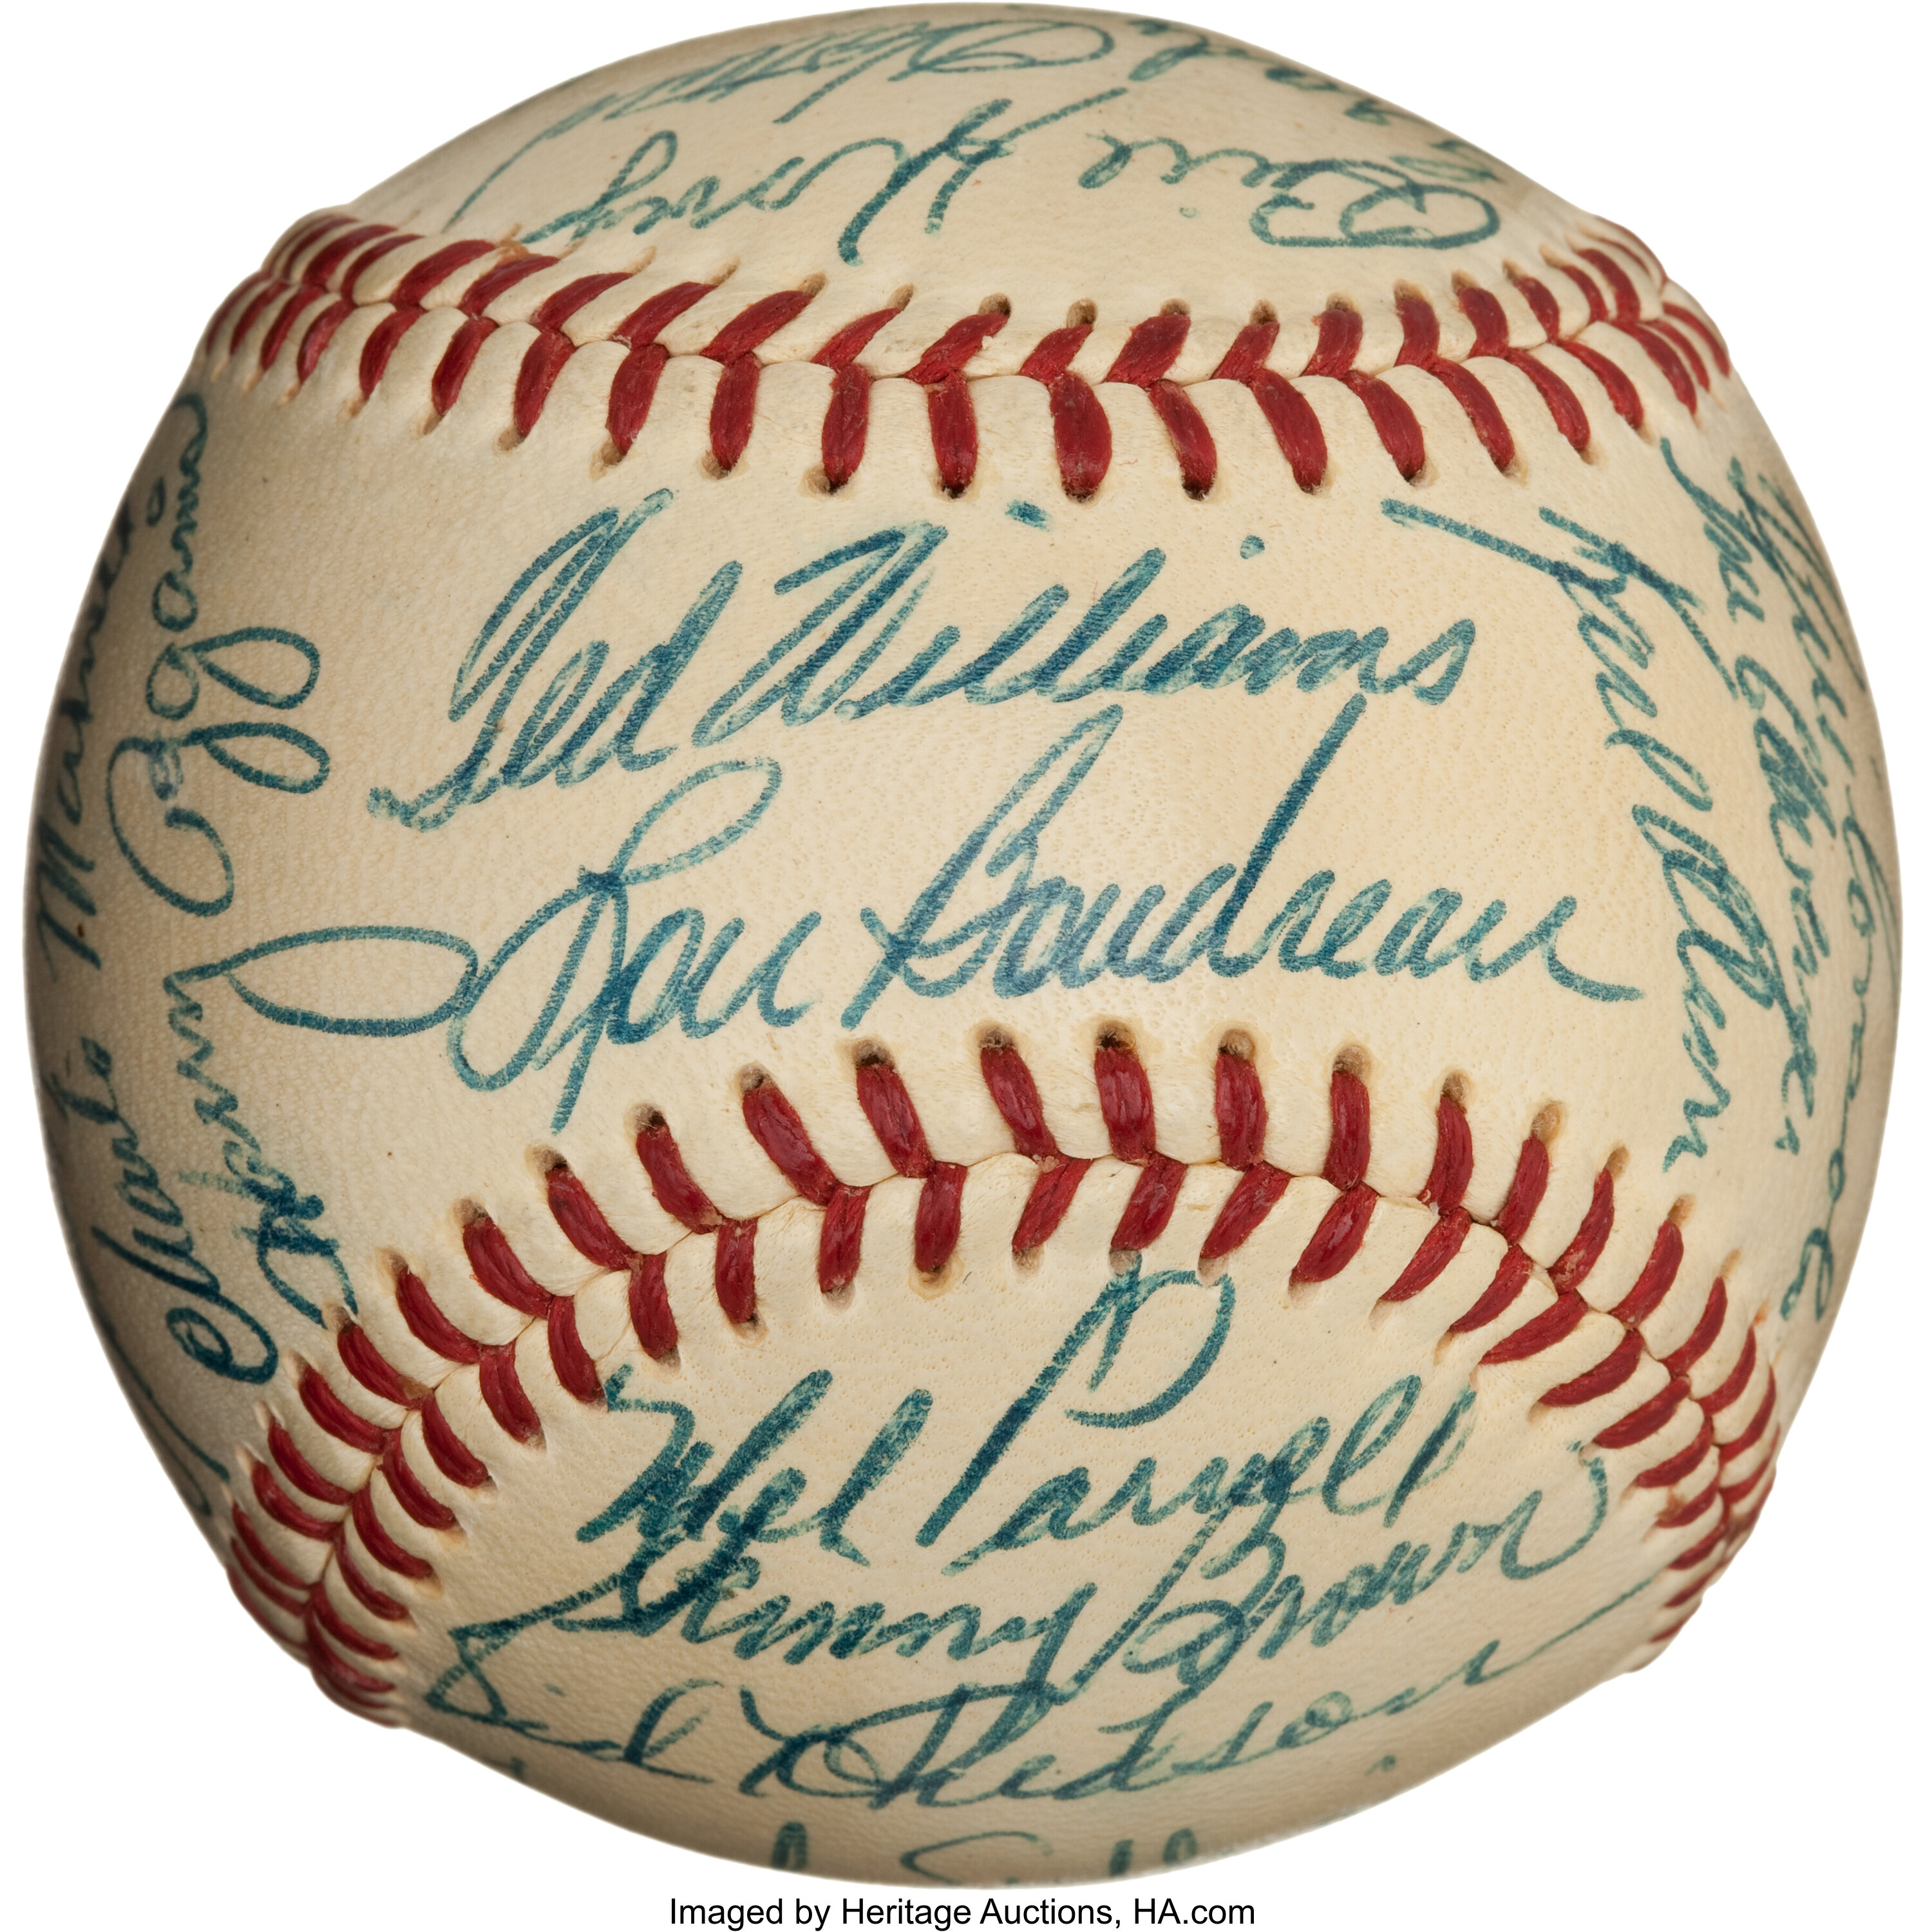 1954 Boston Red Sox Team Signed Baseball with Harry Agganis